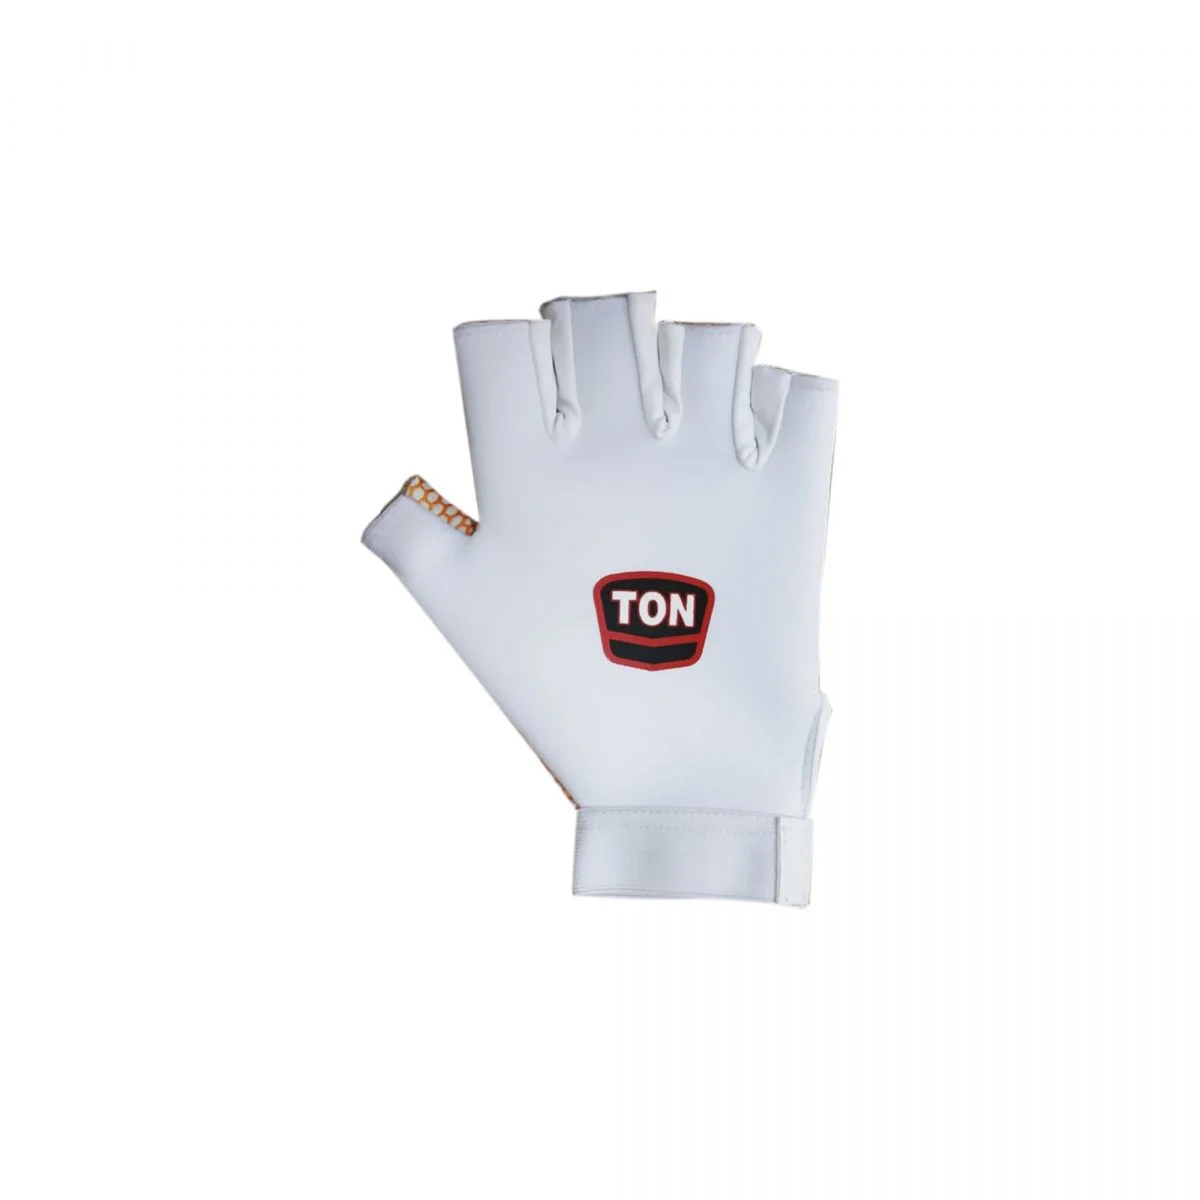 SS Adult Cricket Catching/Fielding Gloves